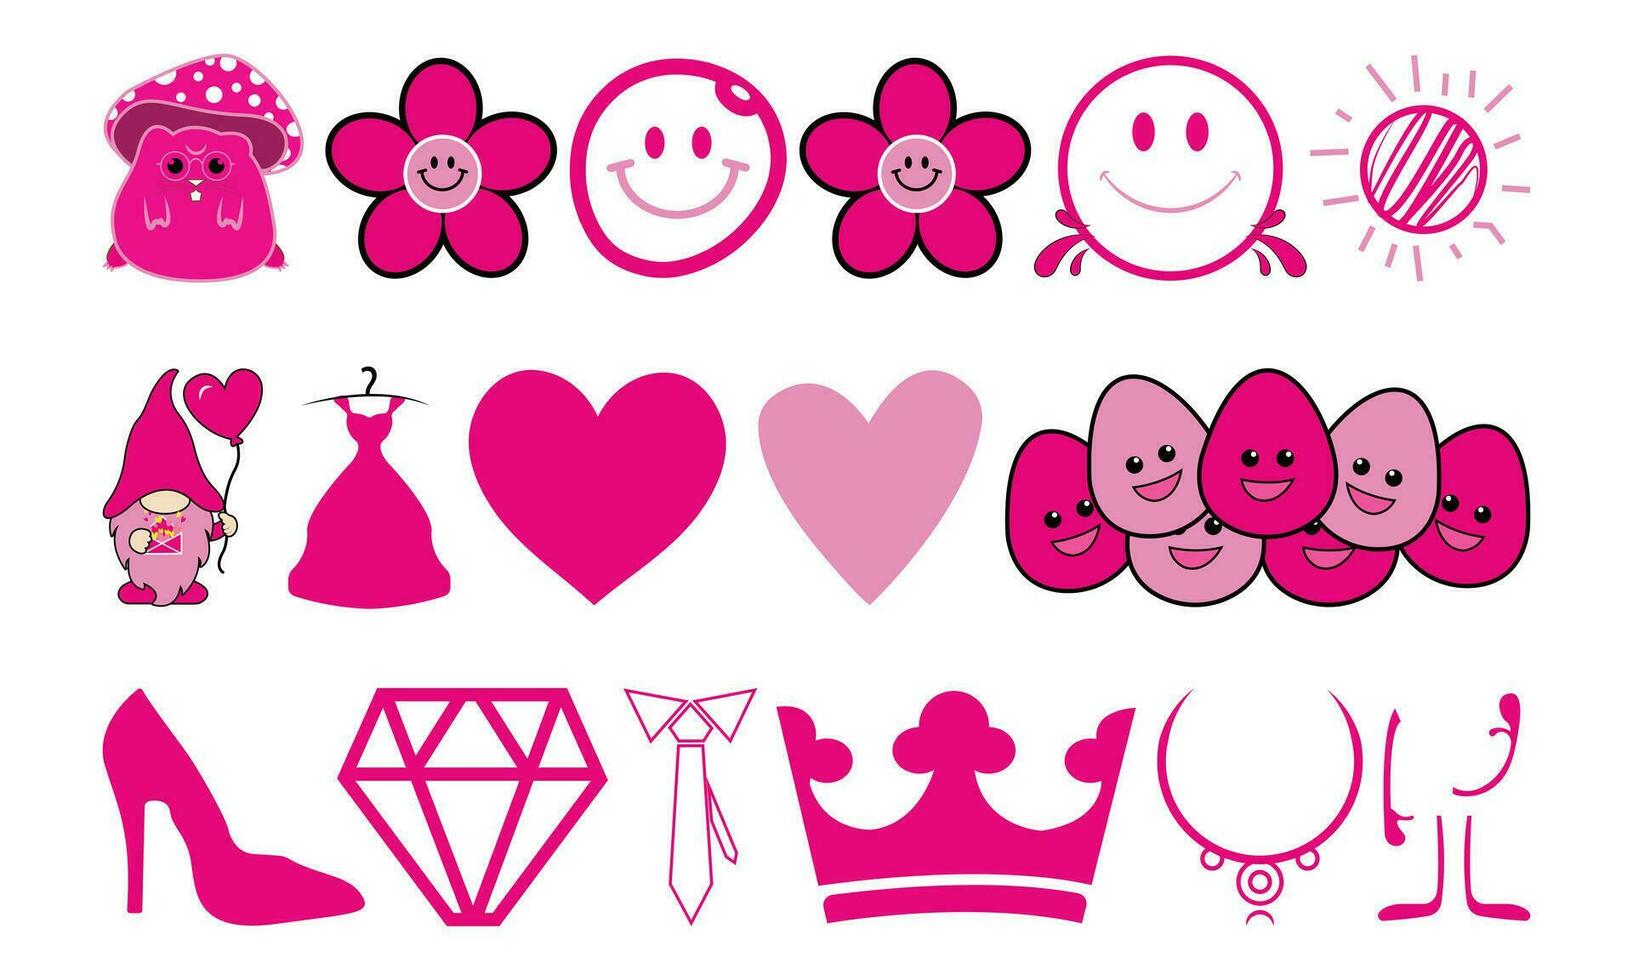 Doll sticker elements Line Art Vector and Illustration Design. Sticker elements Line Art Design and Creative Kids.